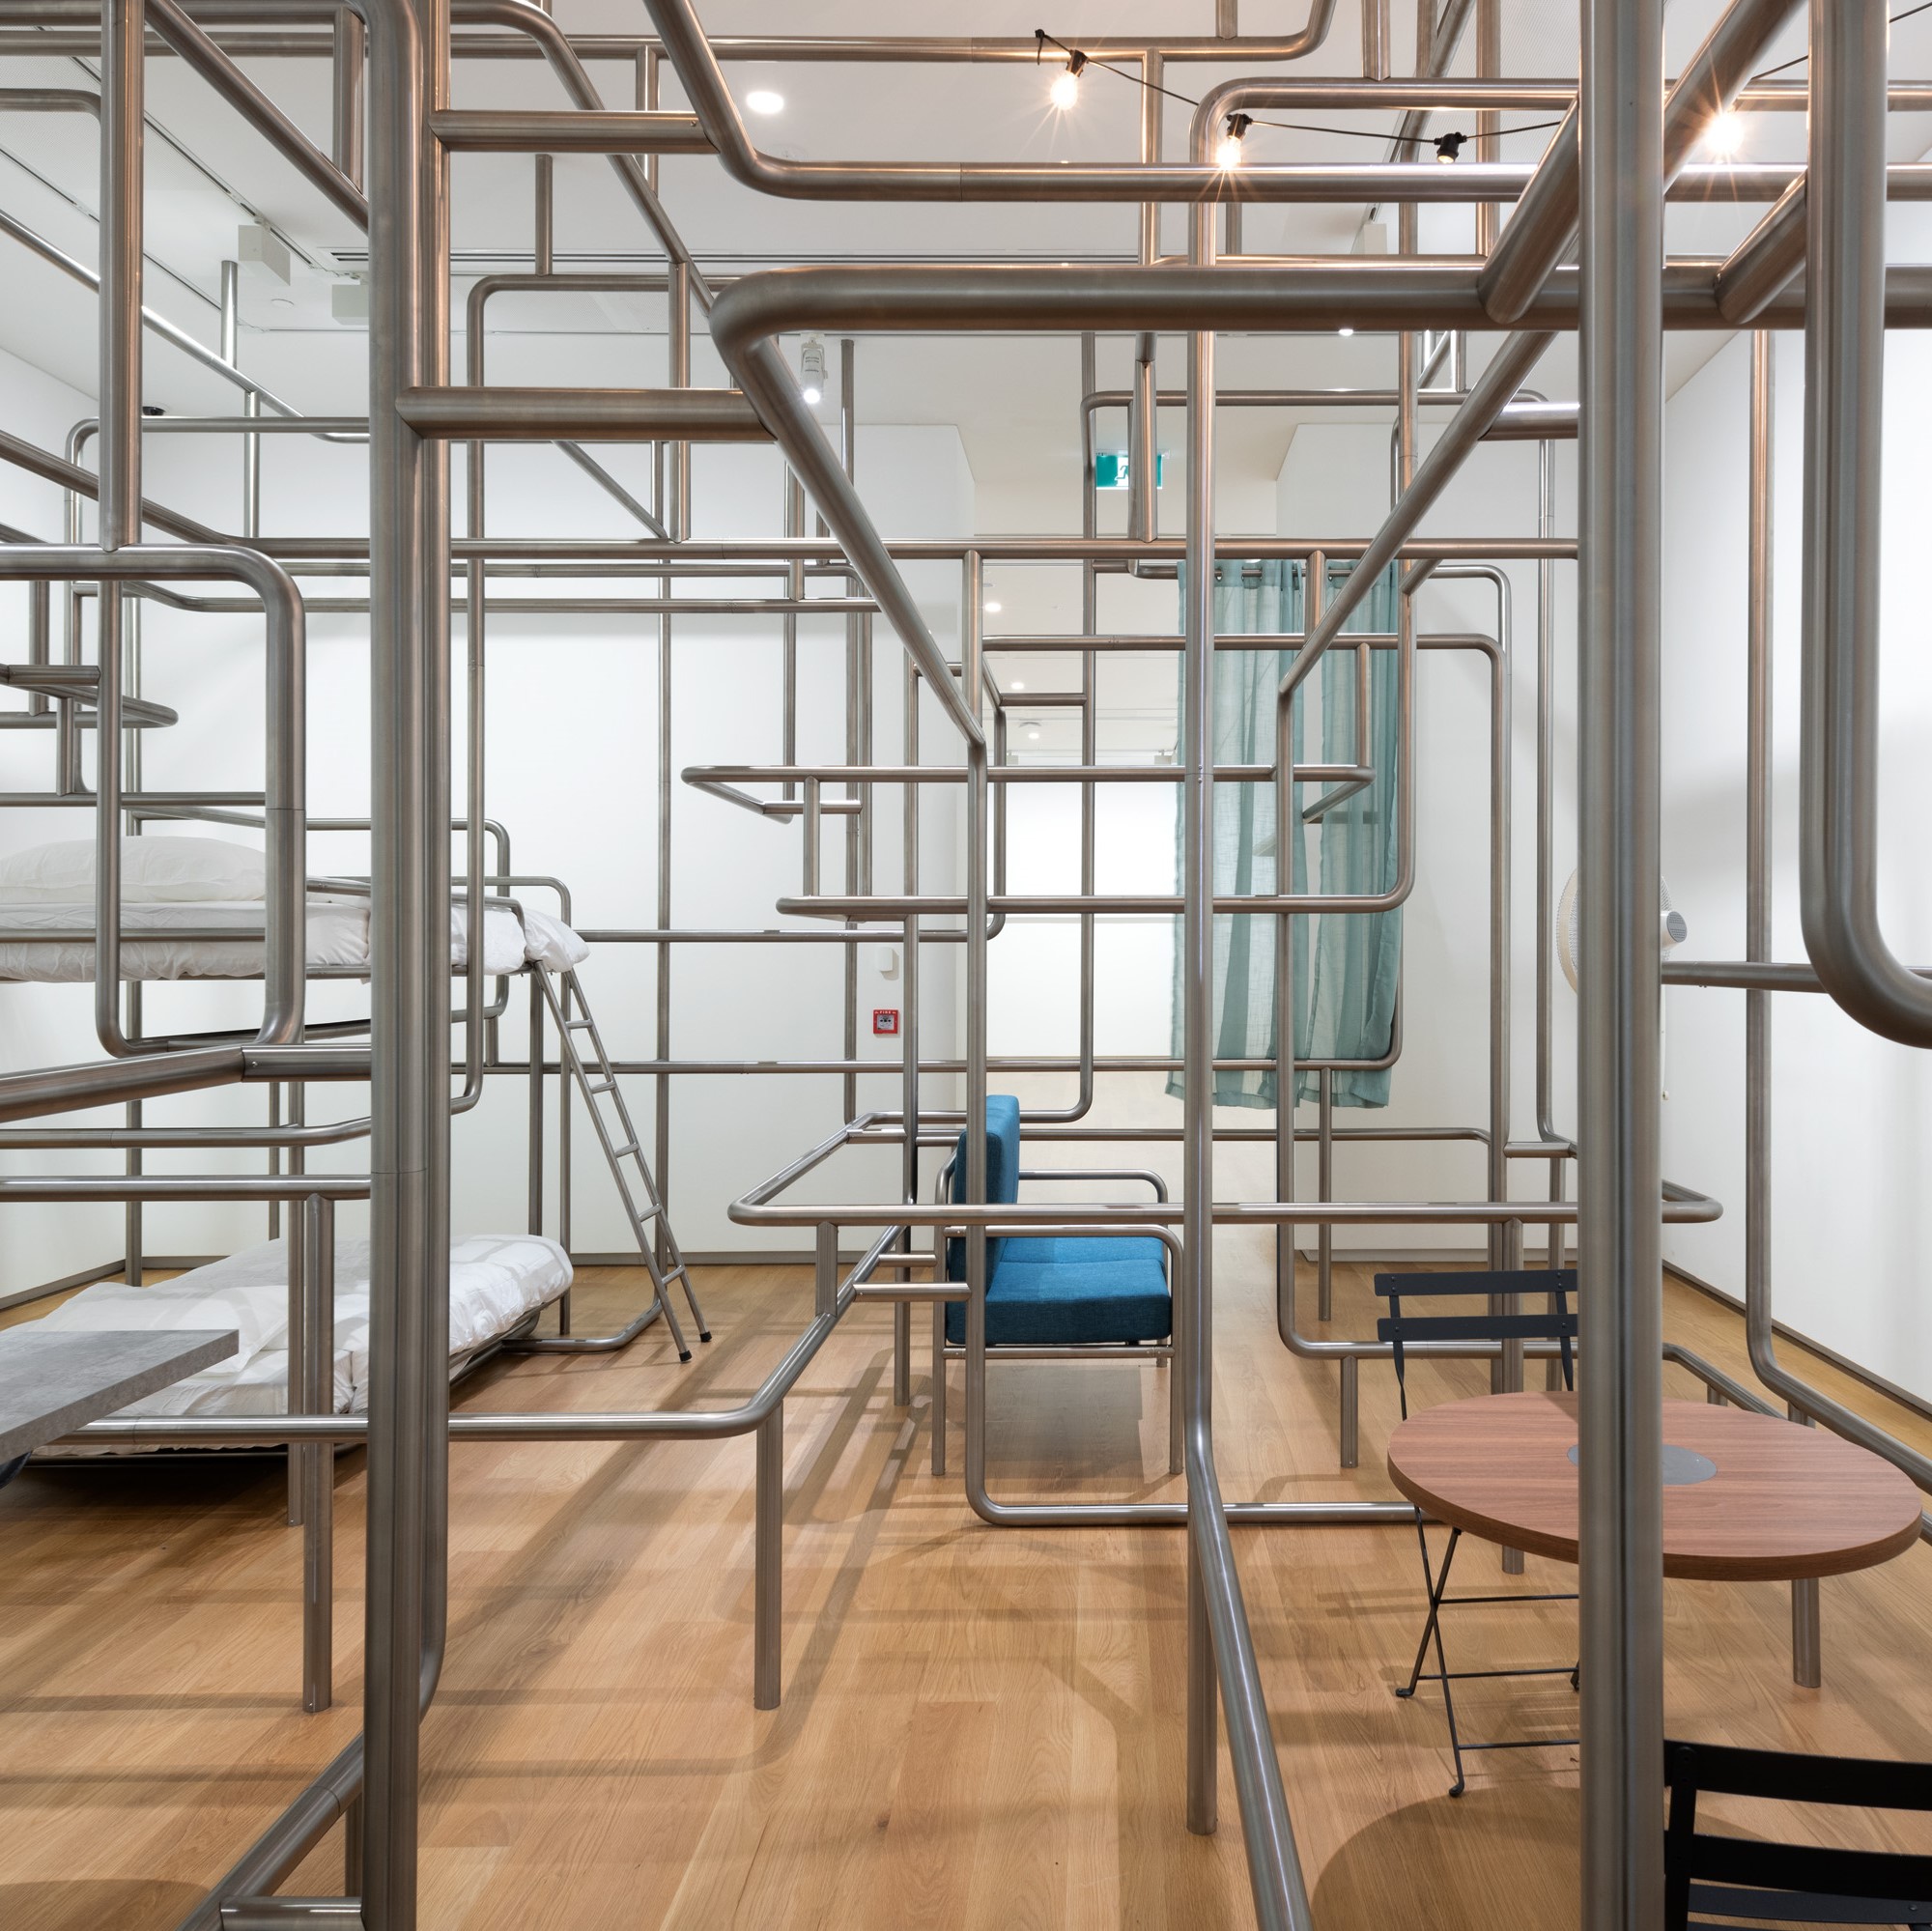 <p>All images: Yona Lee,<em> An Arrangement for 5 Rooms</em>, 2022 (installation views and details: Auckland Art Gallery Toi o Tāmaki, 2022), stainless steel, objects, commissioned by Auckland Art Gallery Toi o Tāmaki, 2022, supported by the Contemporary Benefactors of the Auckland Art Gallery, Asia New Zealand Foundation and Chow:Hill Architects, courtesy of Fine Arts, Sydney</p>
